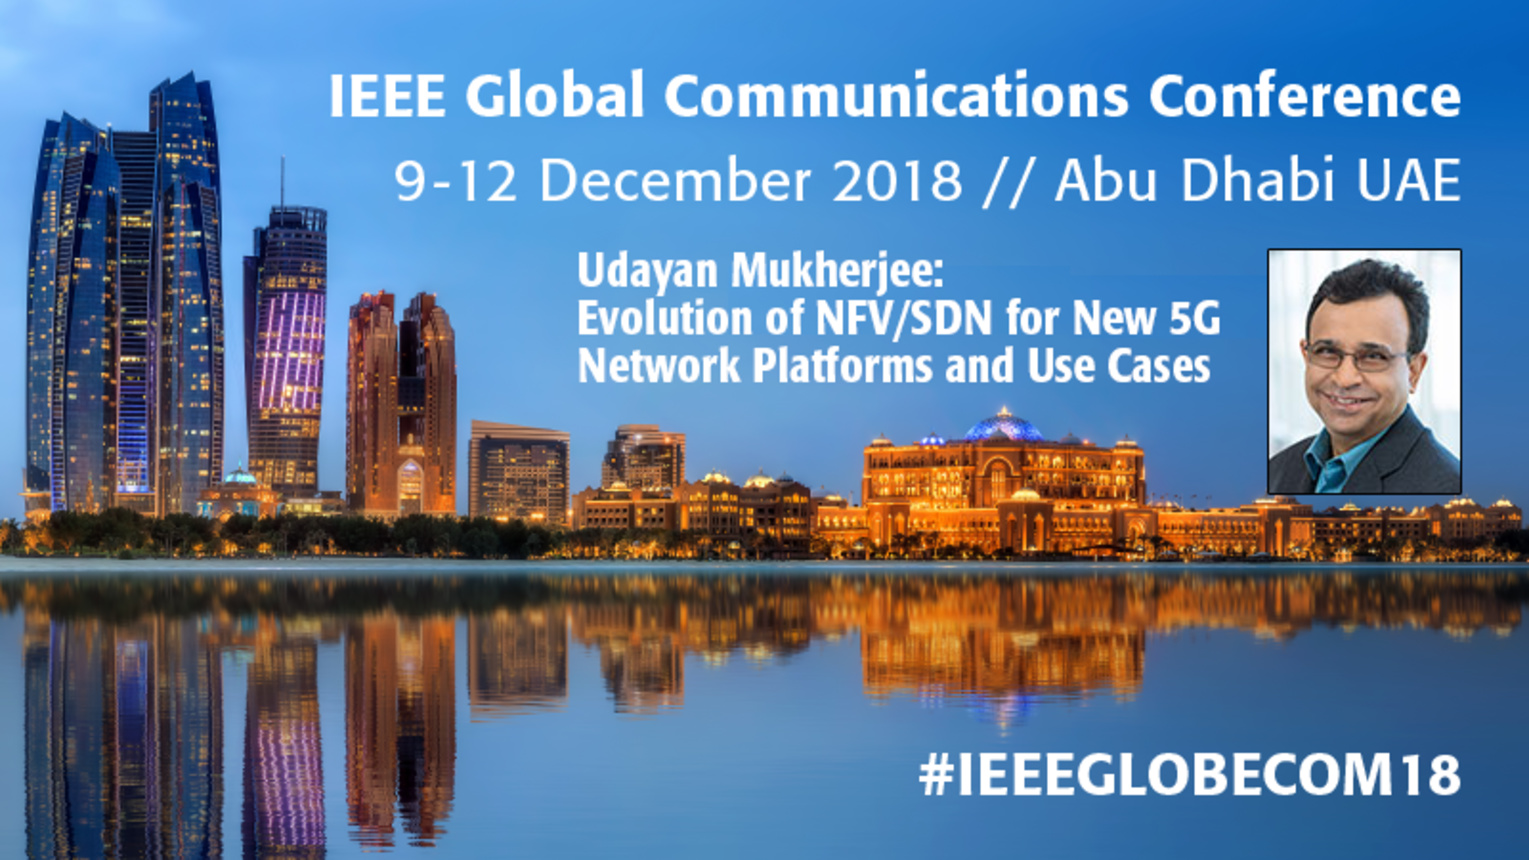 Evolution of NFV/SDN for New 5G Network Platforms and Use Cases - Udayan Mukherjee at IEEE GLOBECOM 2018